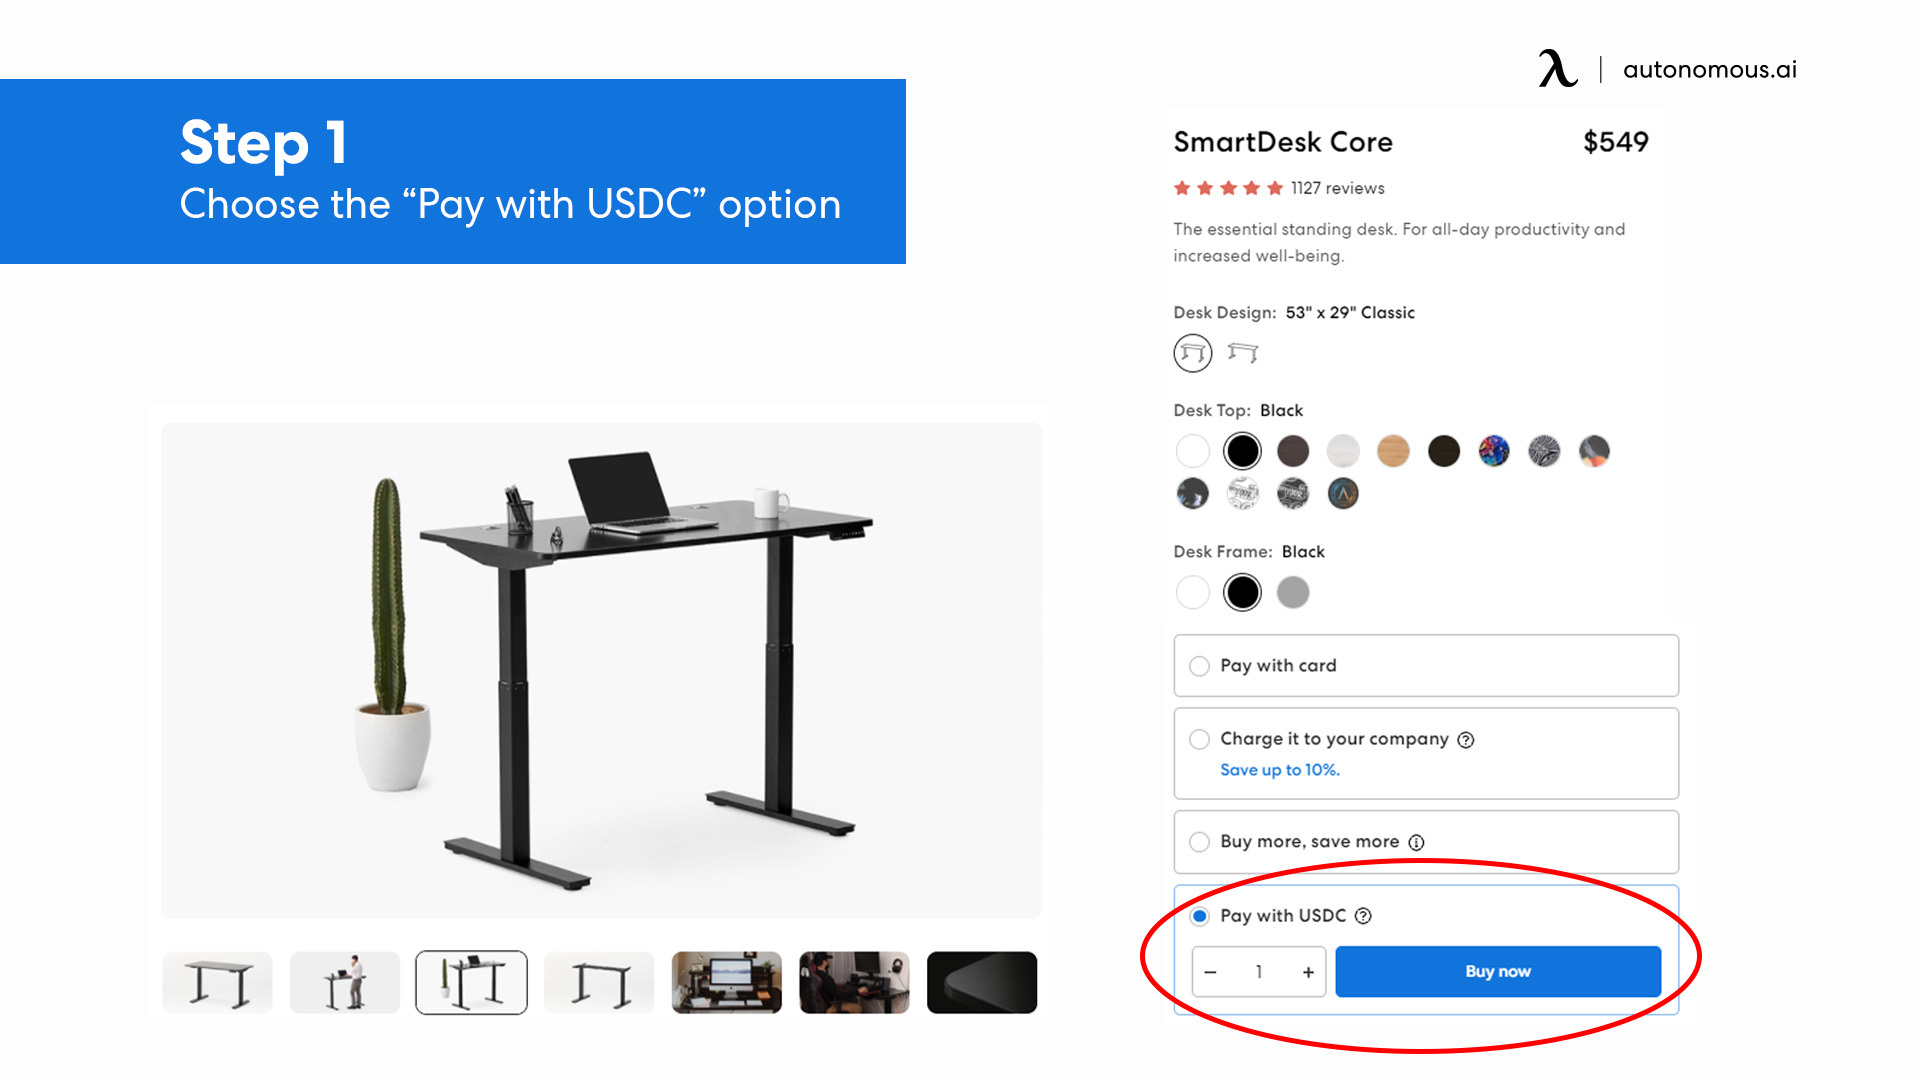 Choose Pay with USDC option